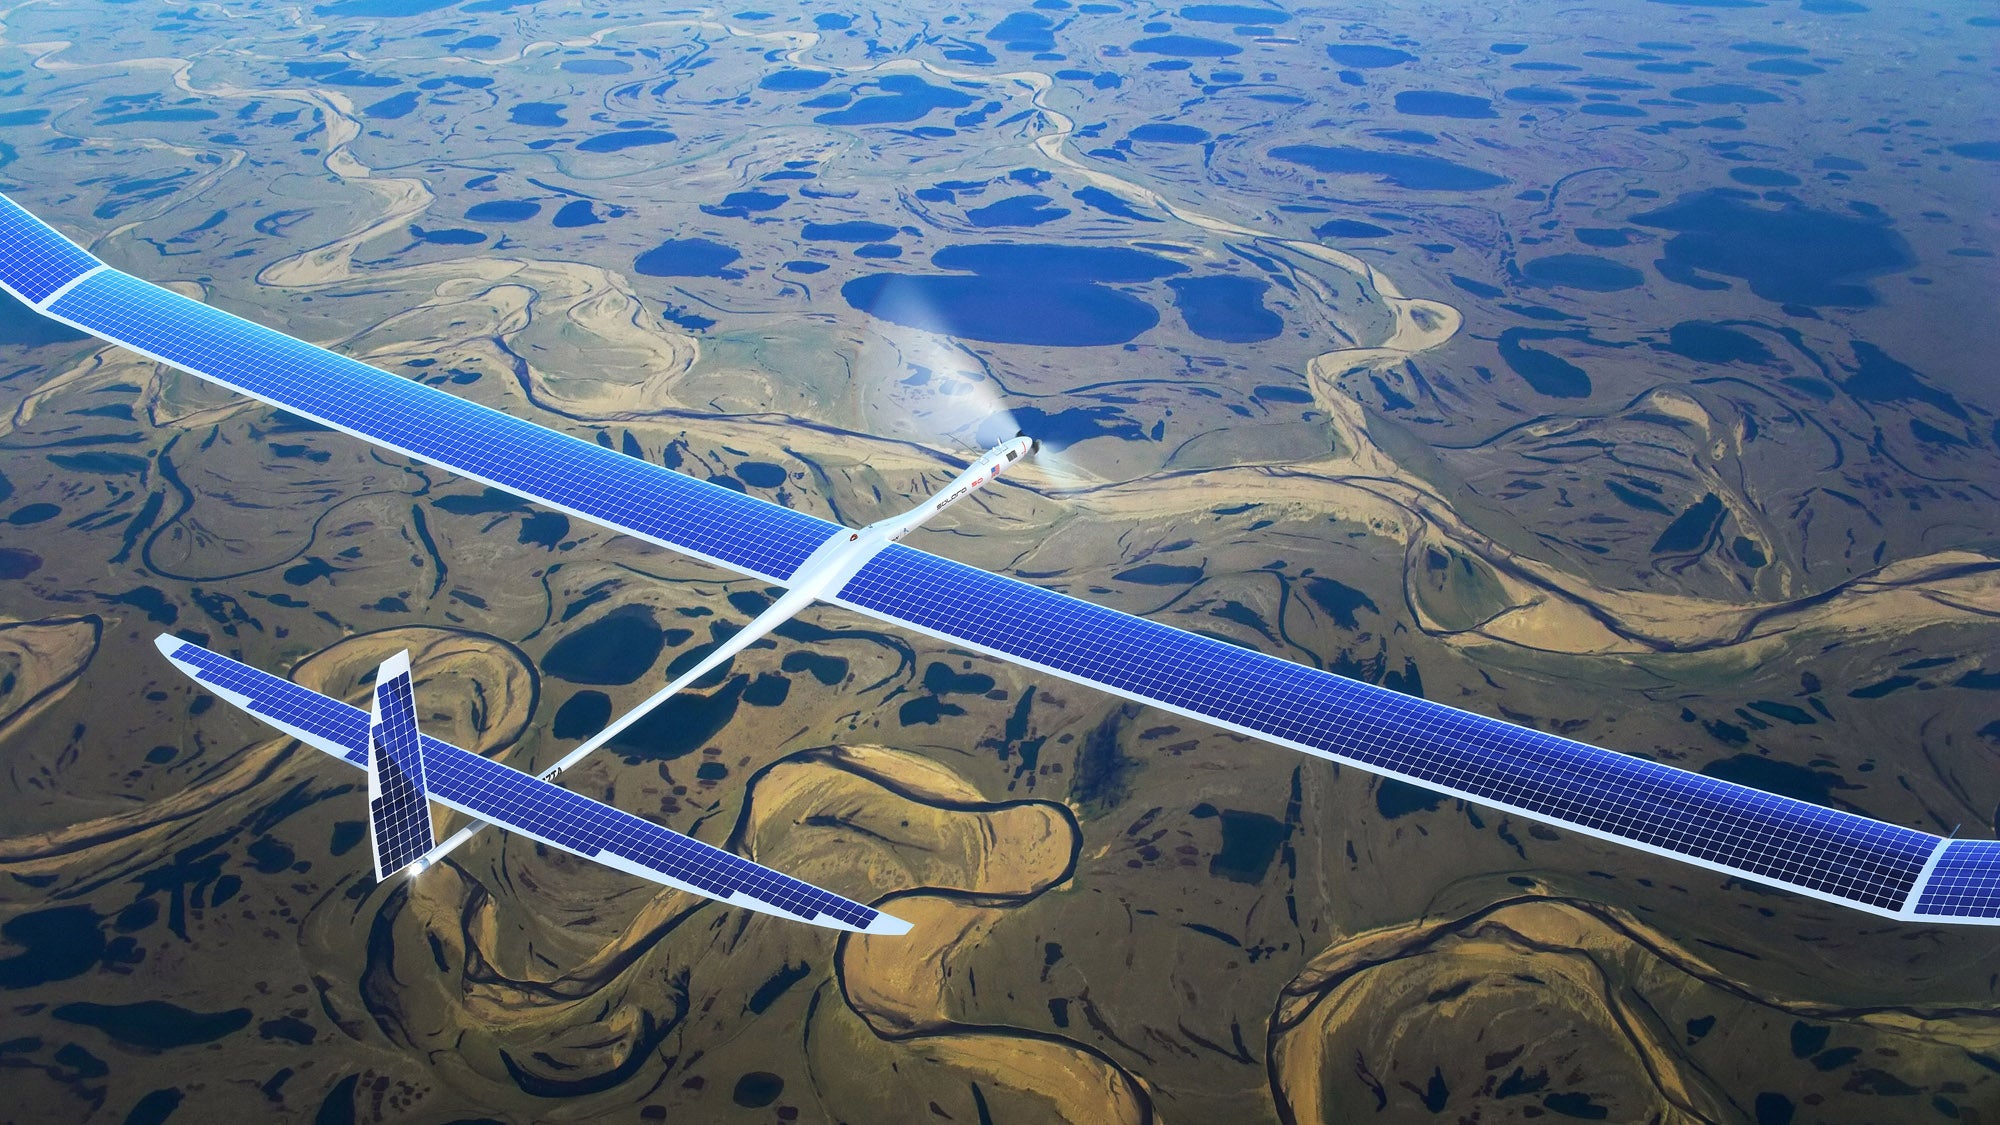 US technology companies have invested in building high-altitude drones